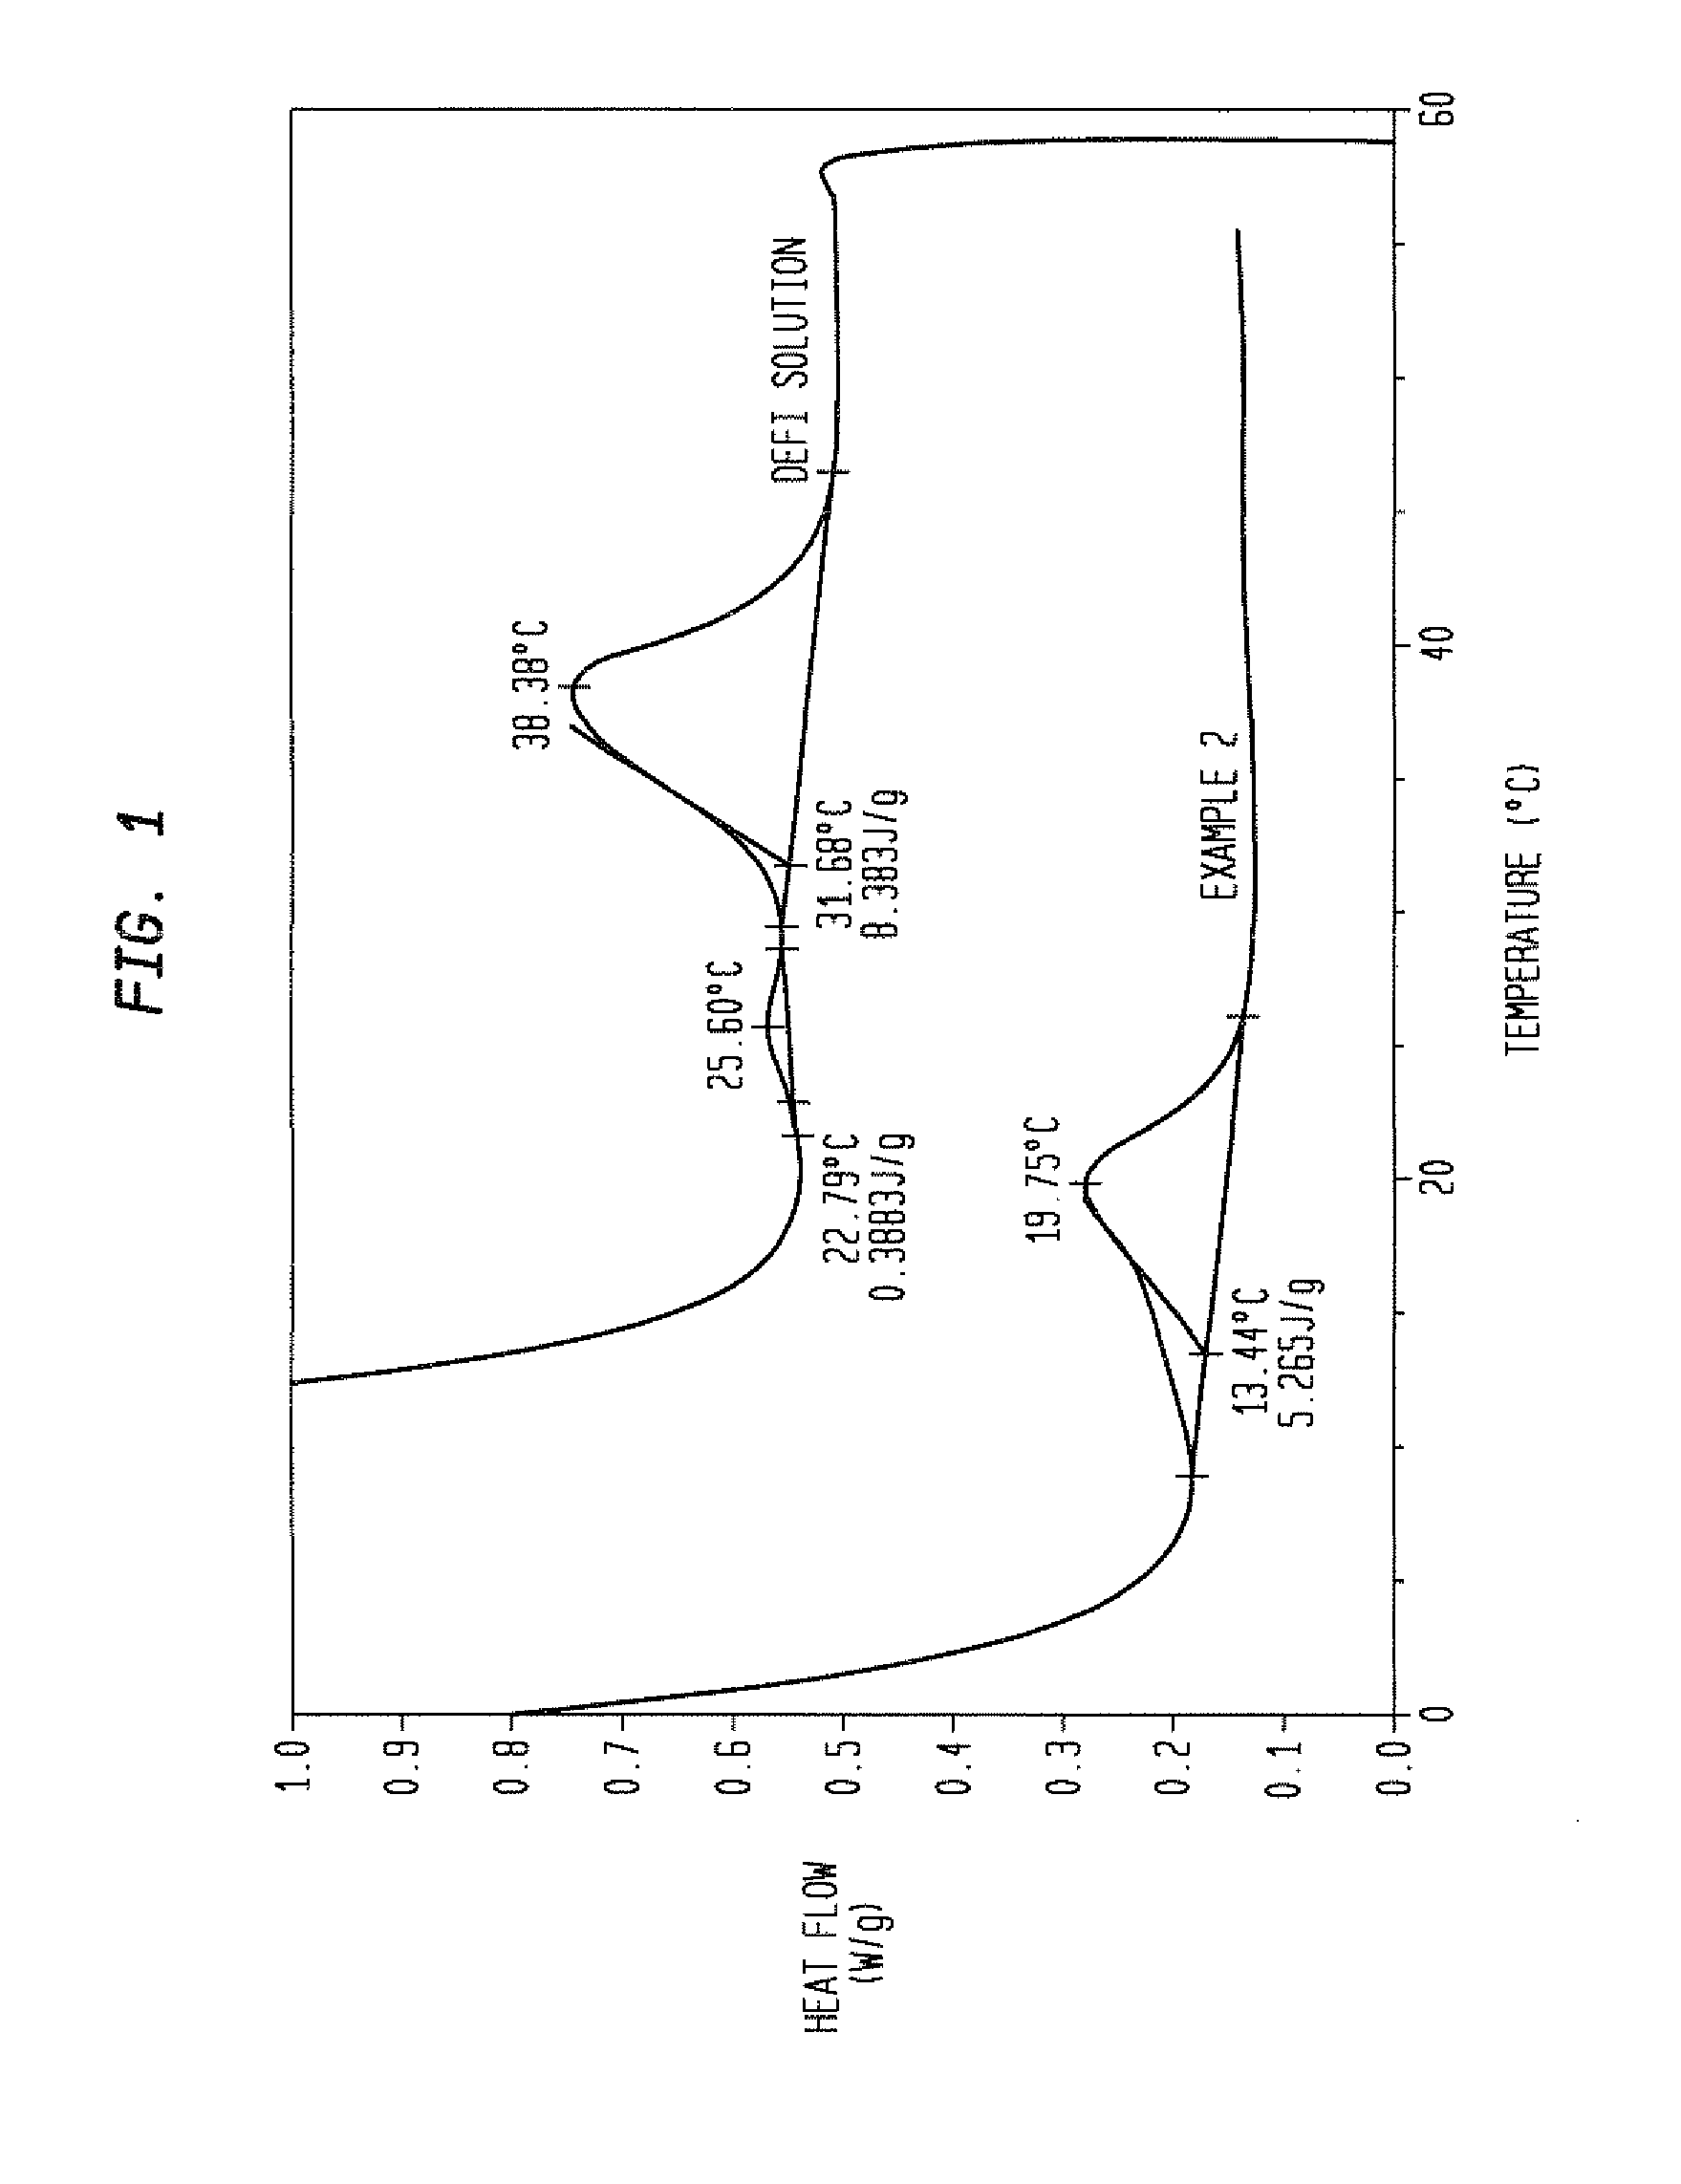 Method of providing stability for liquid cleansing compositions comprising broad selection fatty acyl isethionate surfactants